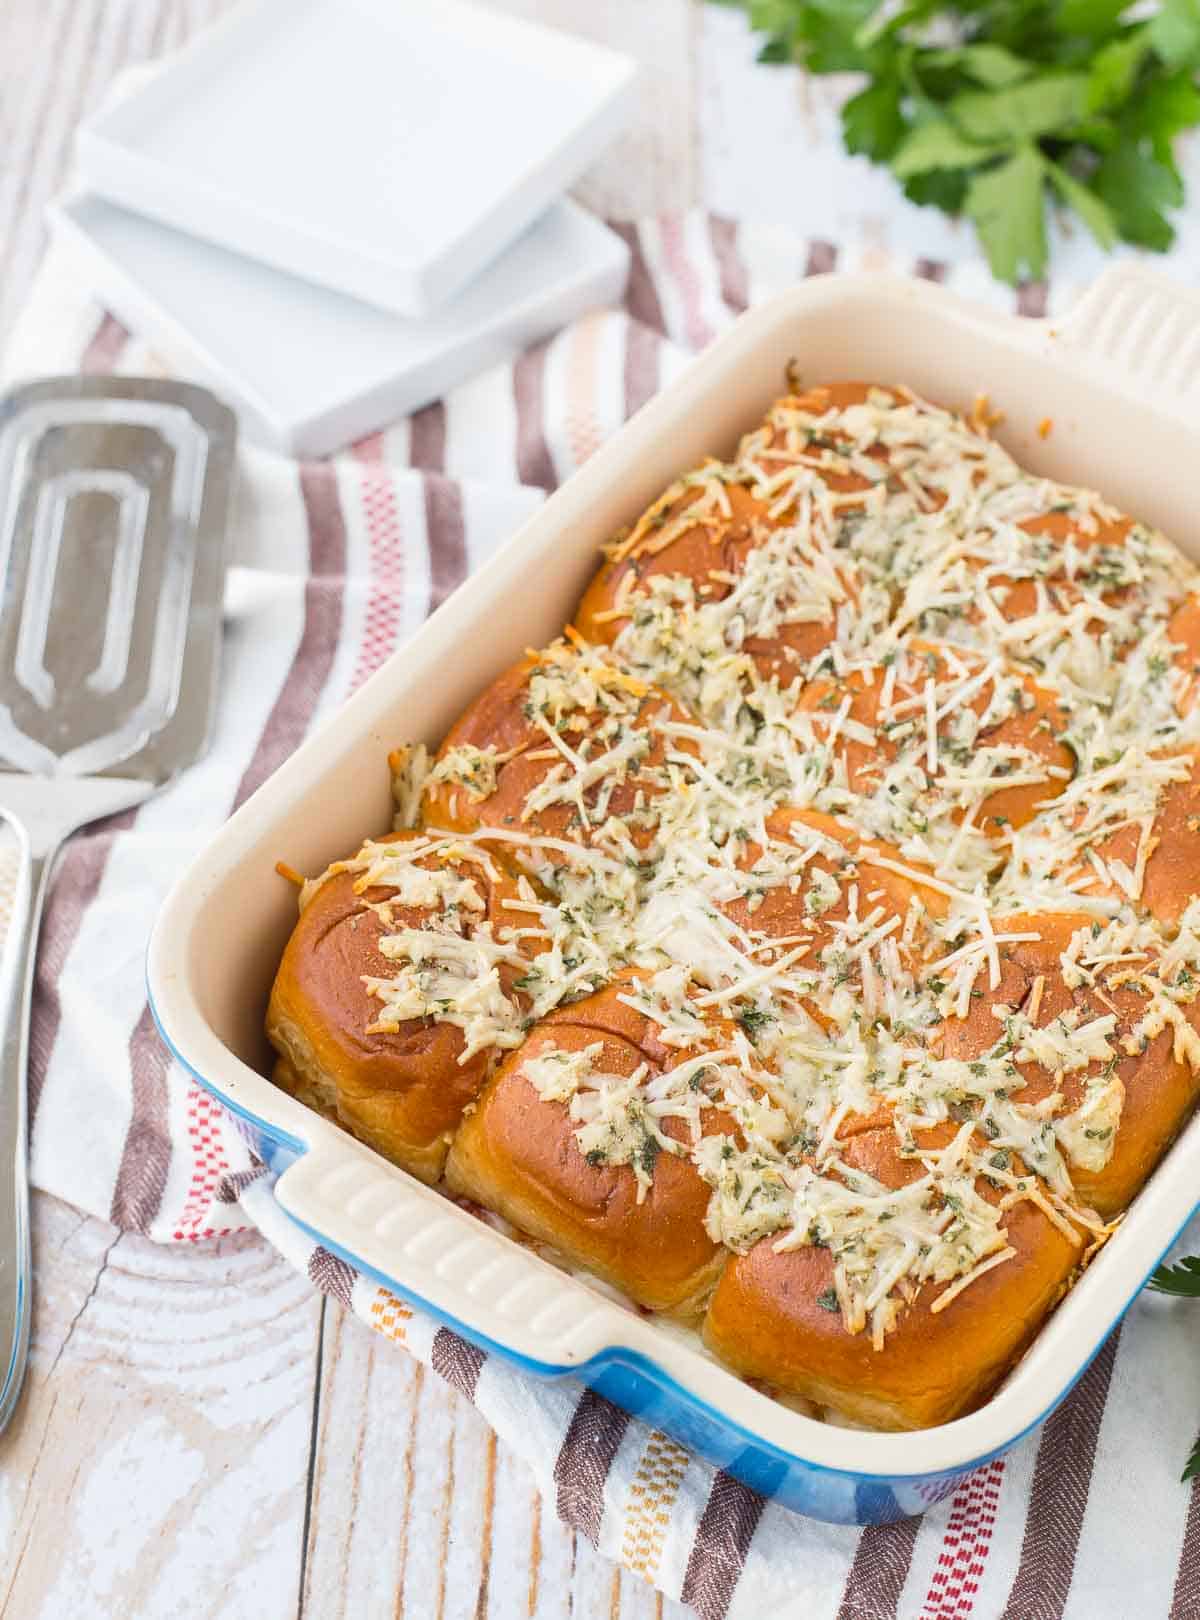 Casserole dish of pizza sliders, topped with parmesan cheese.